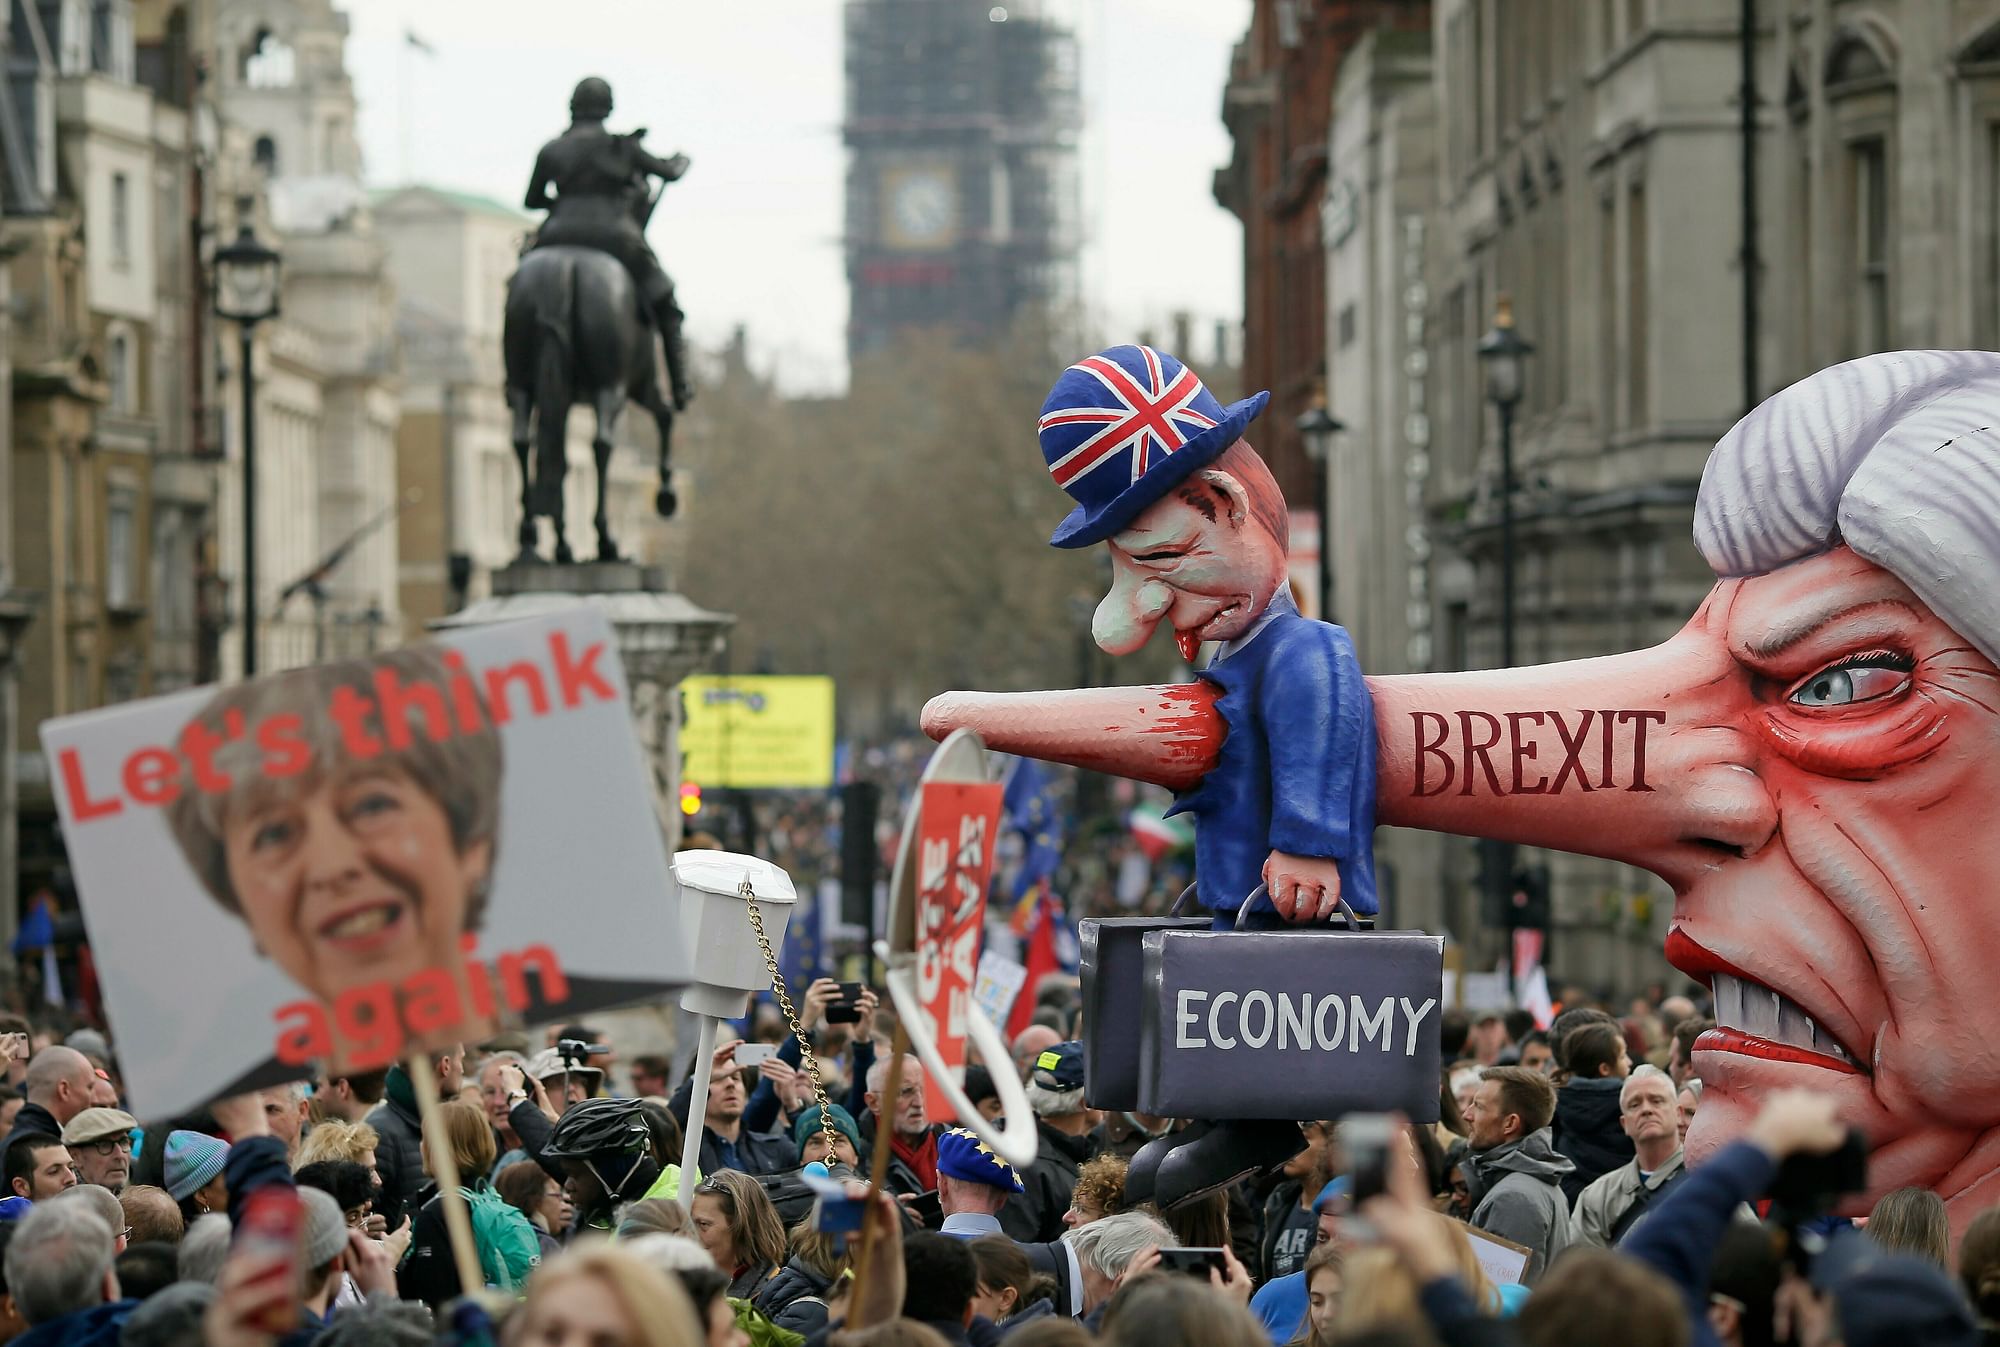 The “People’s Vote March” on Saturday, 23 March, snaked from Park Lane and other locations to converge on the UK Parliament.